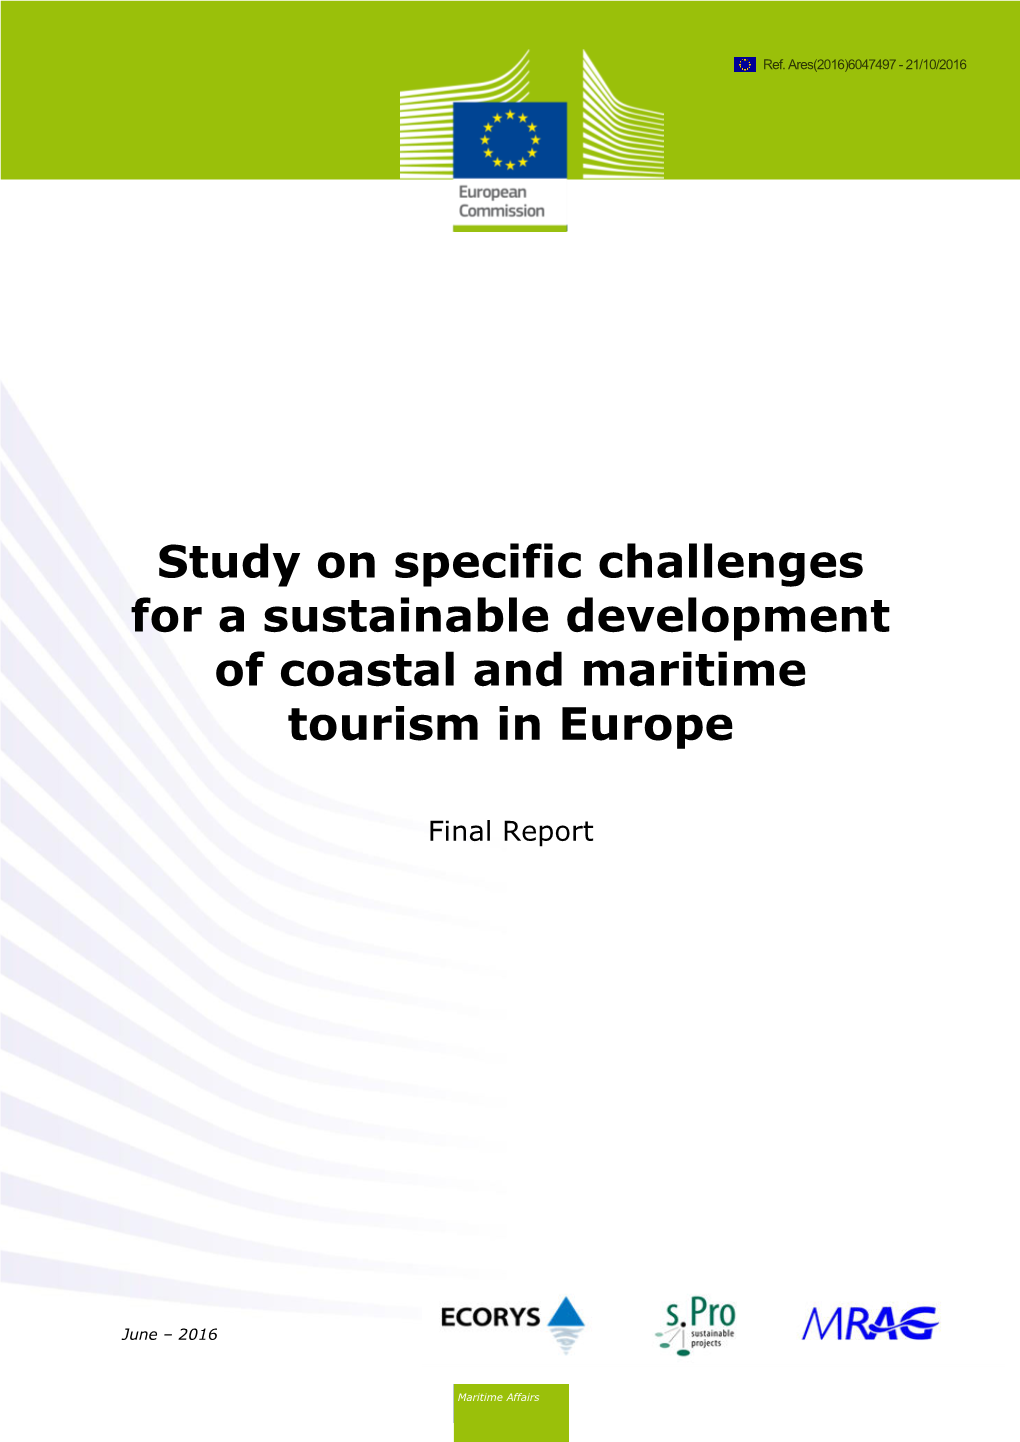 Study on Specific Challenges for a Sustainable Development of Coastal and Maritime Tourism in Europe